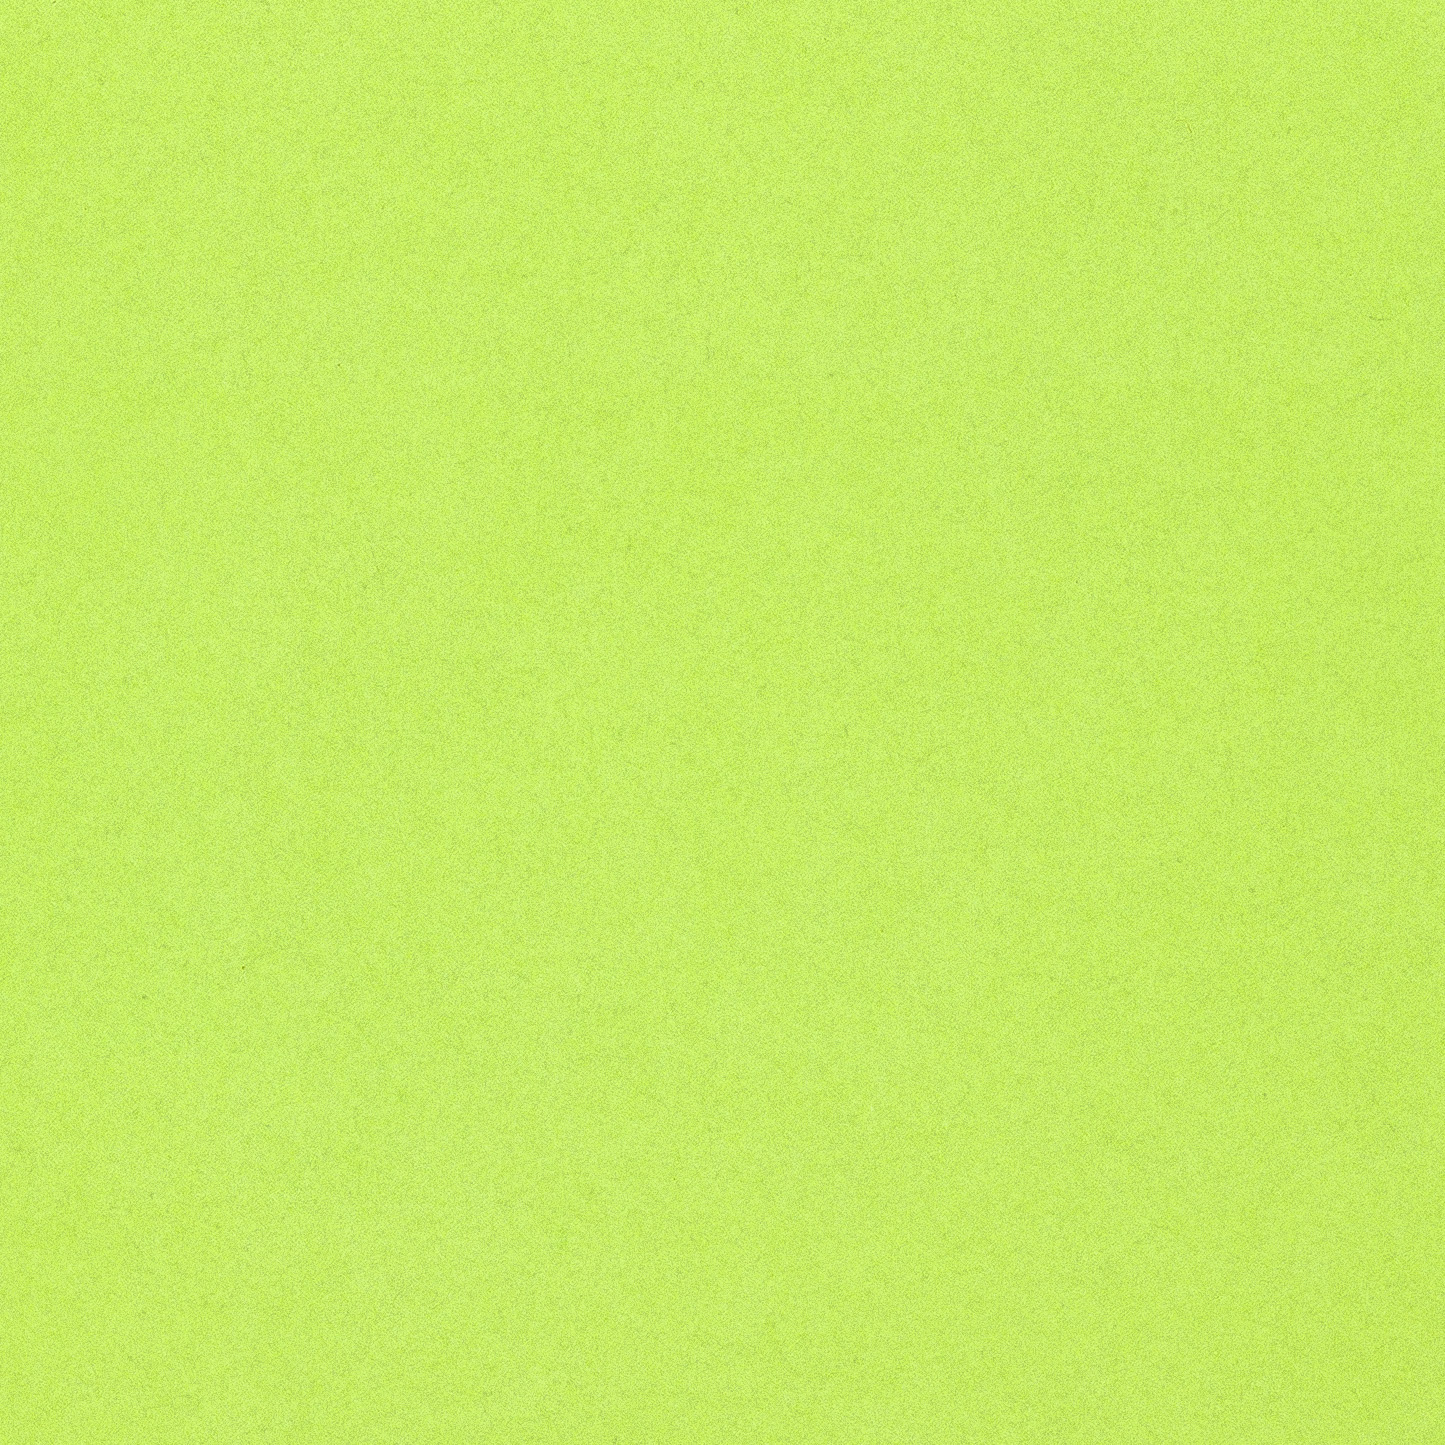 Pearlescent - Lime Green 120gsm